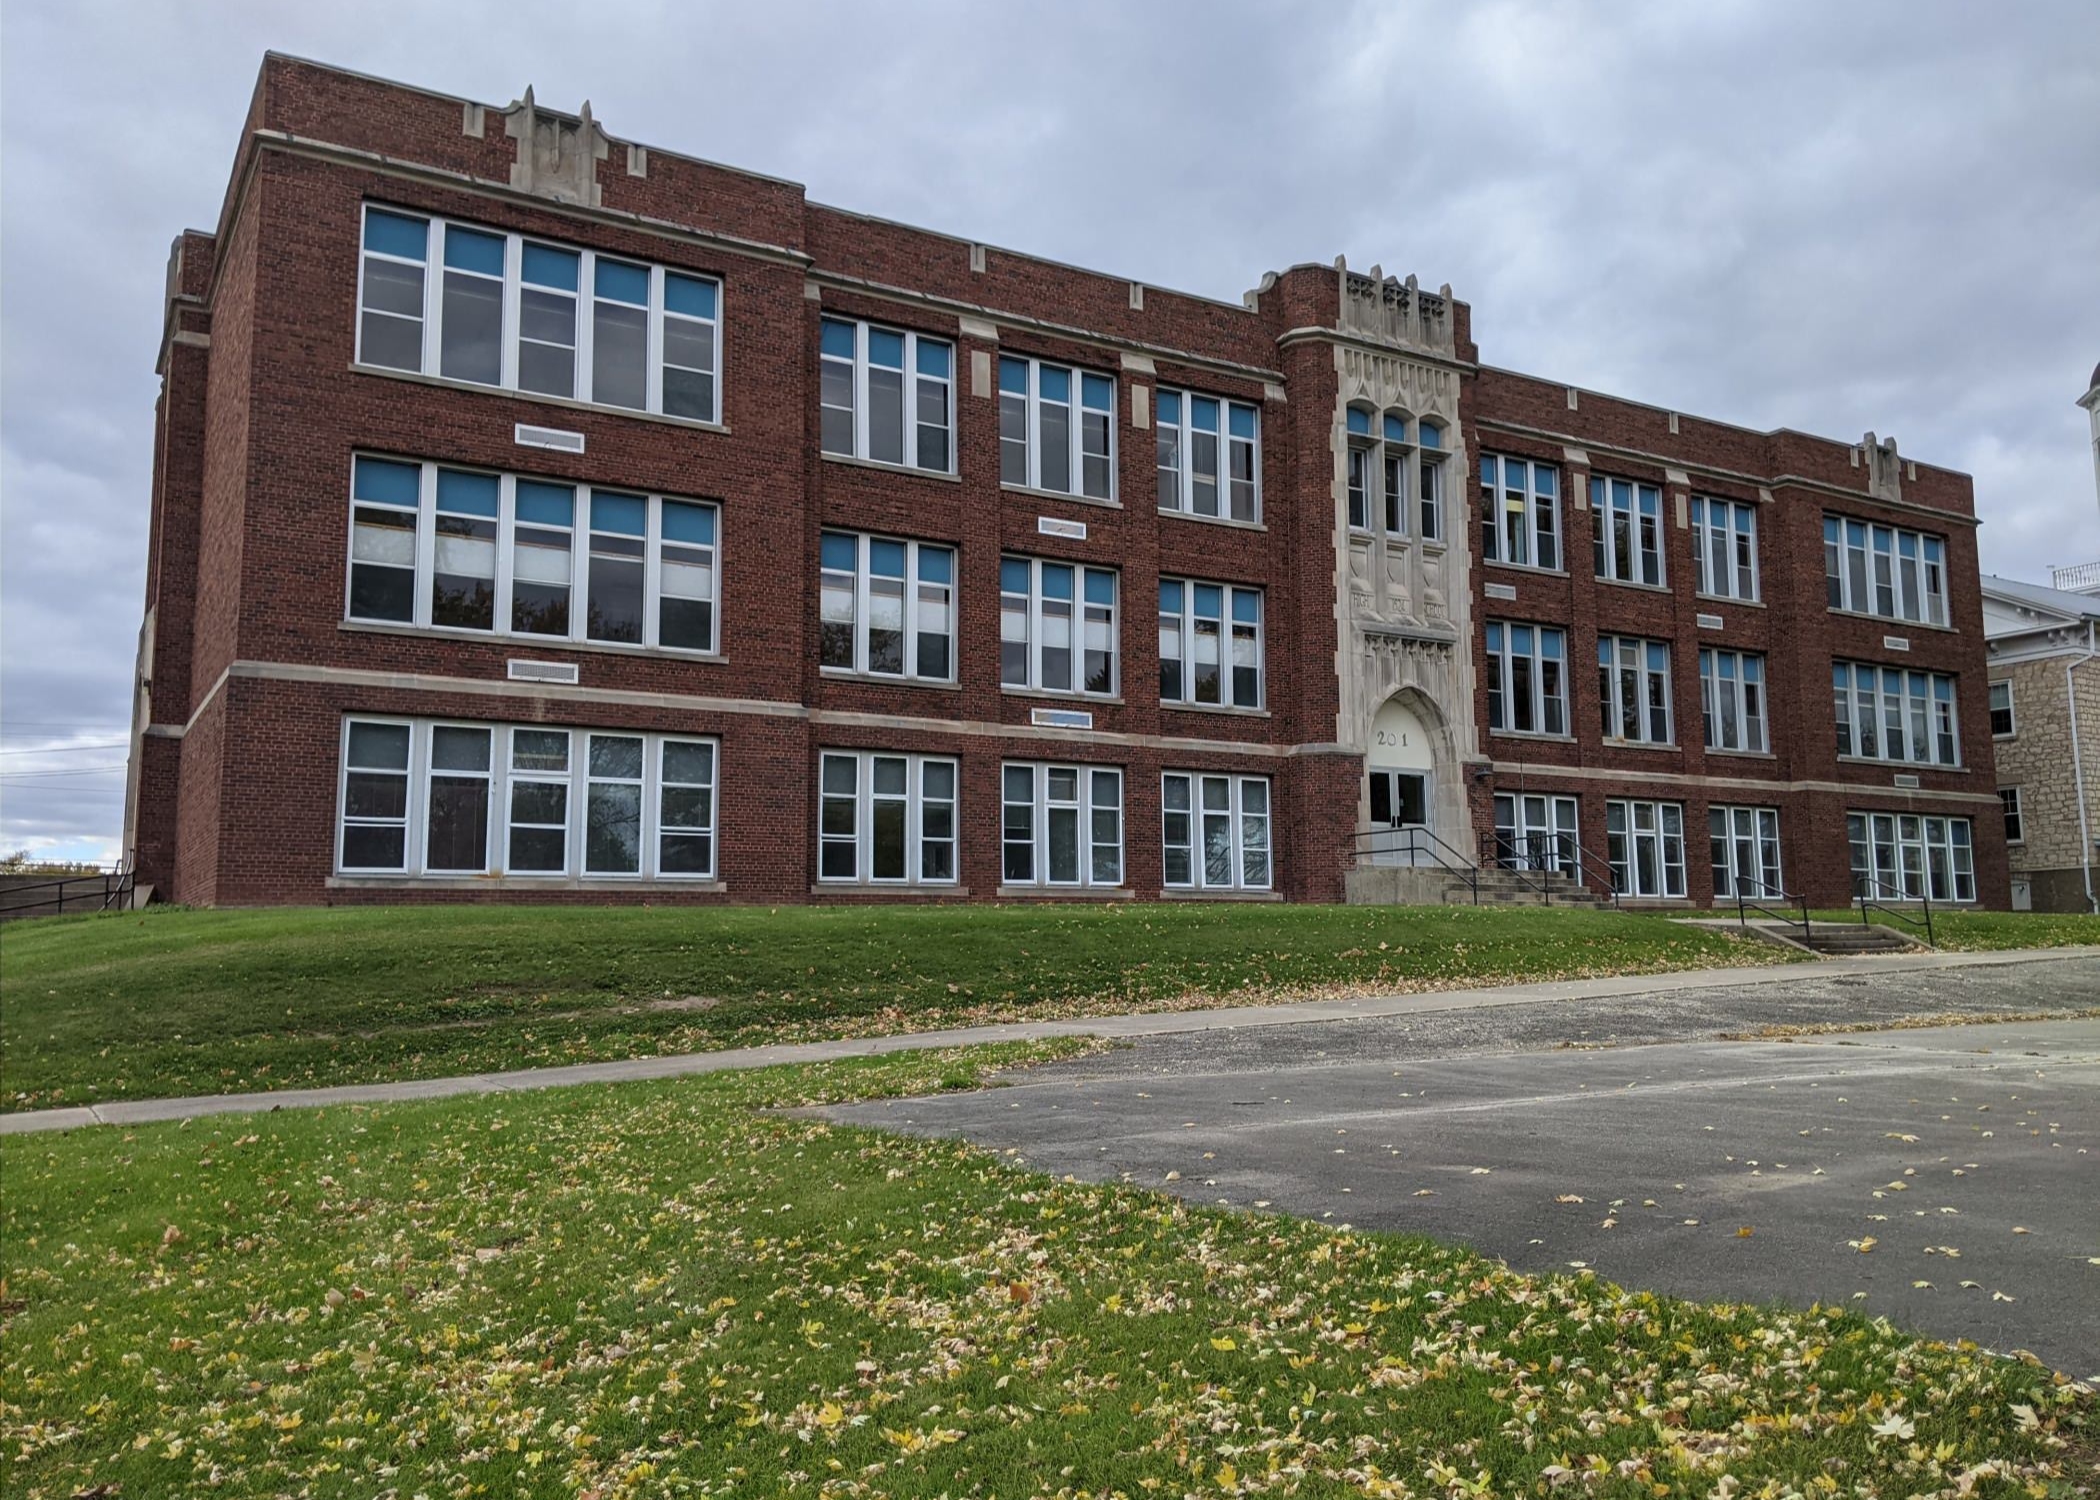 Vacant school building offers solution to a rural town’s housing shortage